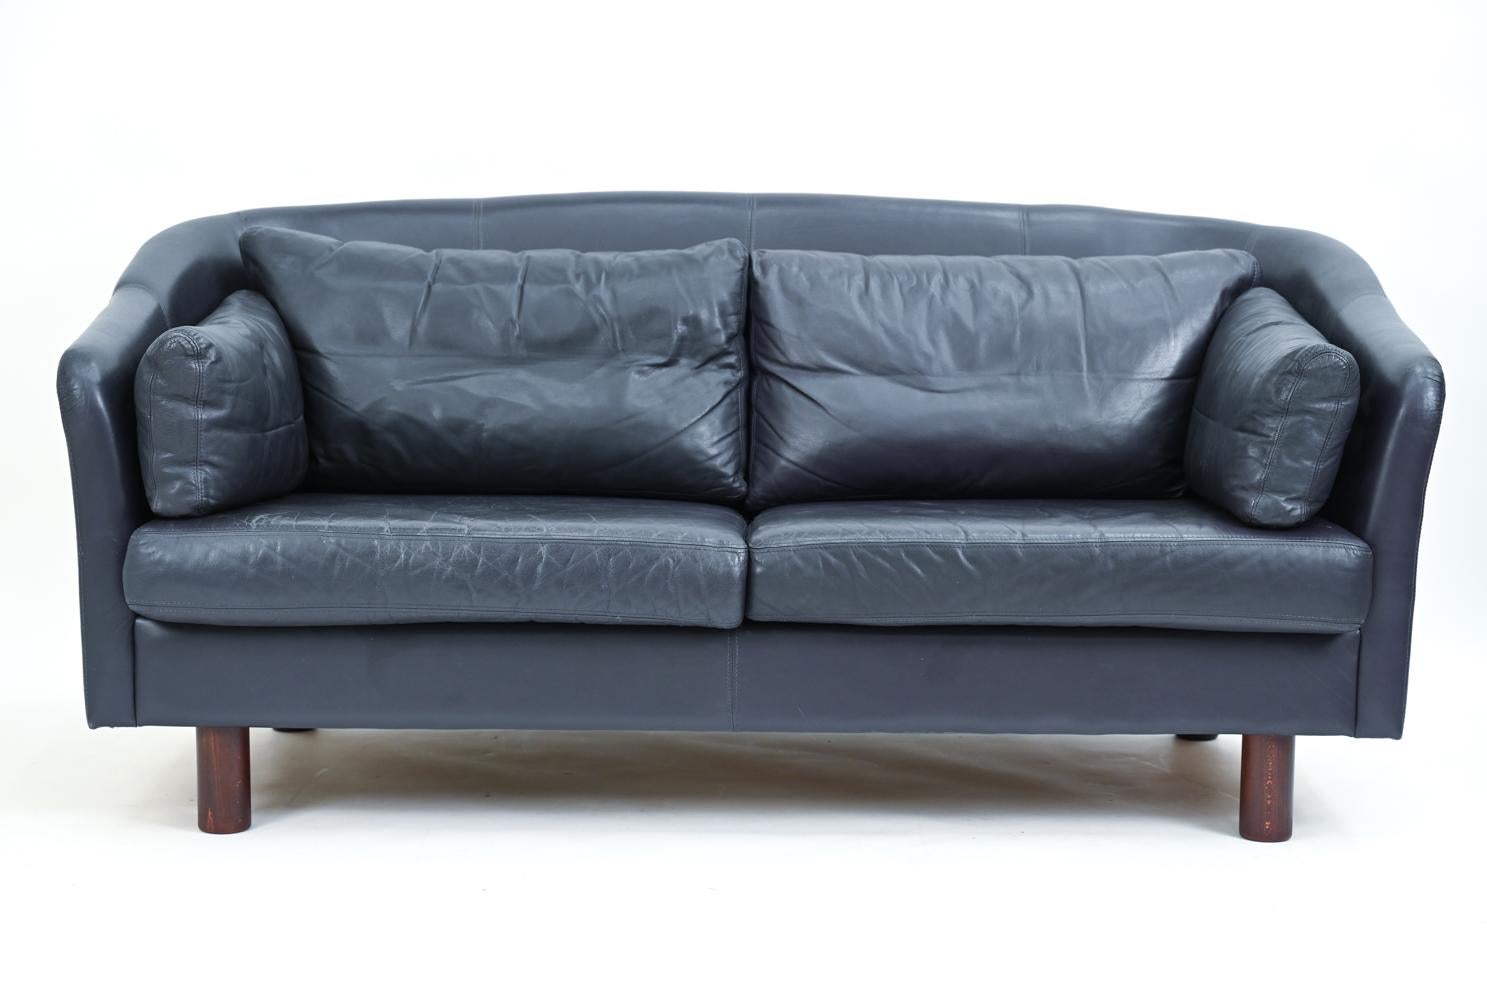 Pair of Swedish Modern Leather Sofas by Dux, c. 1970's 8